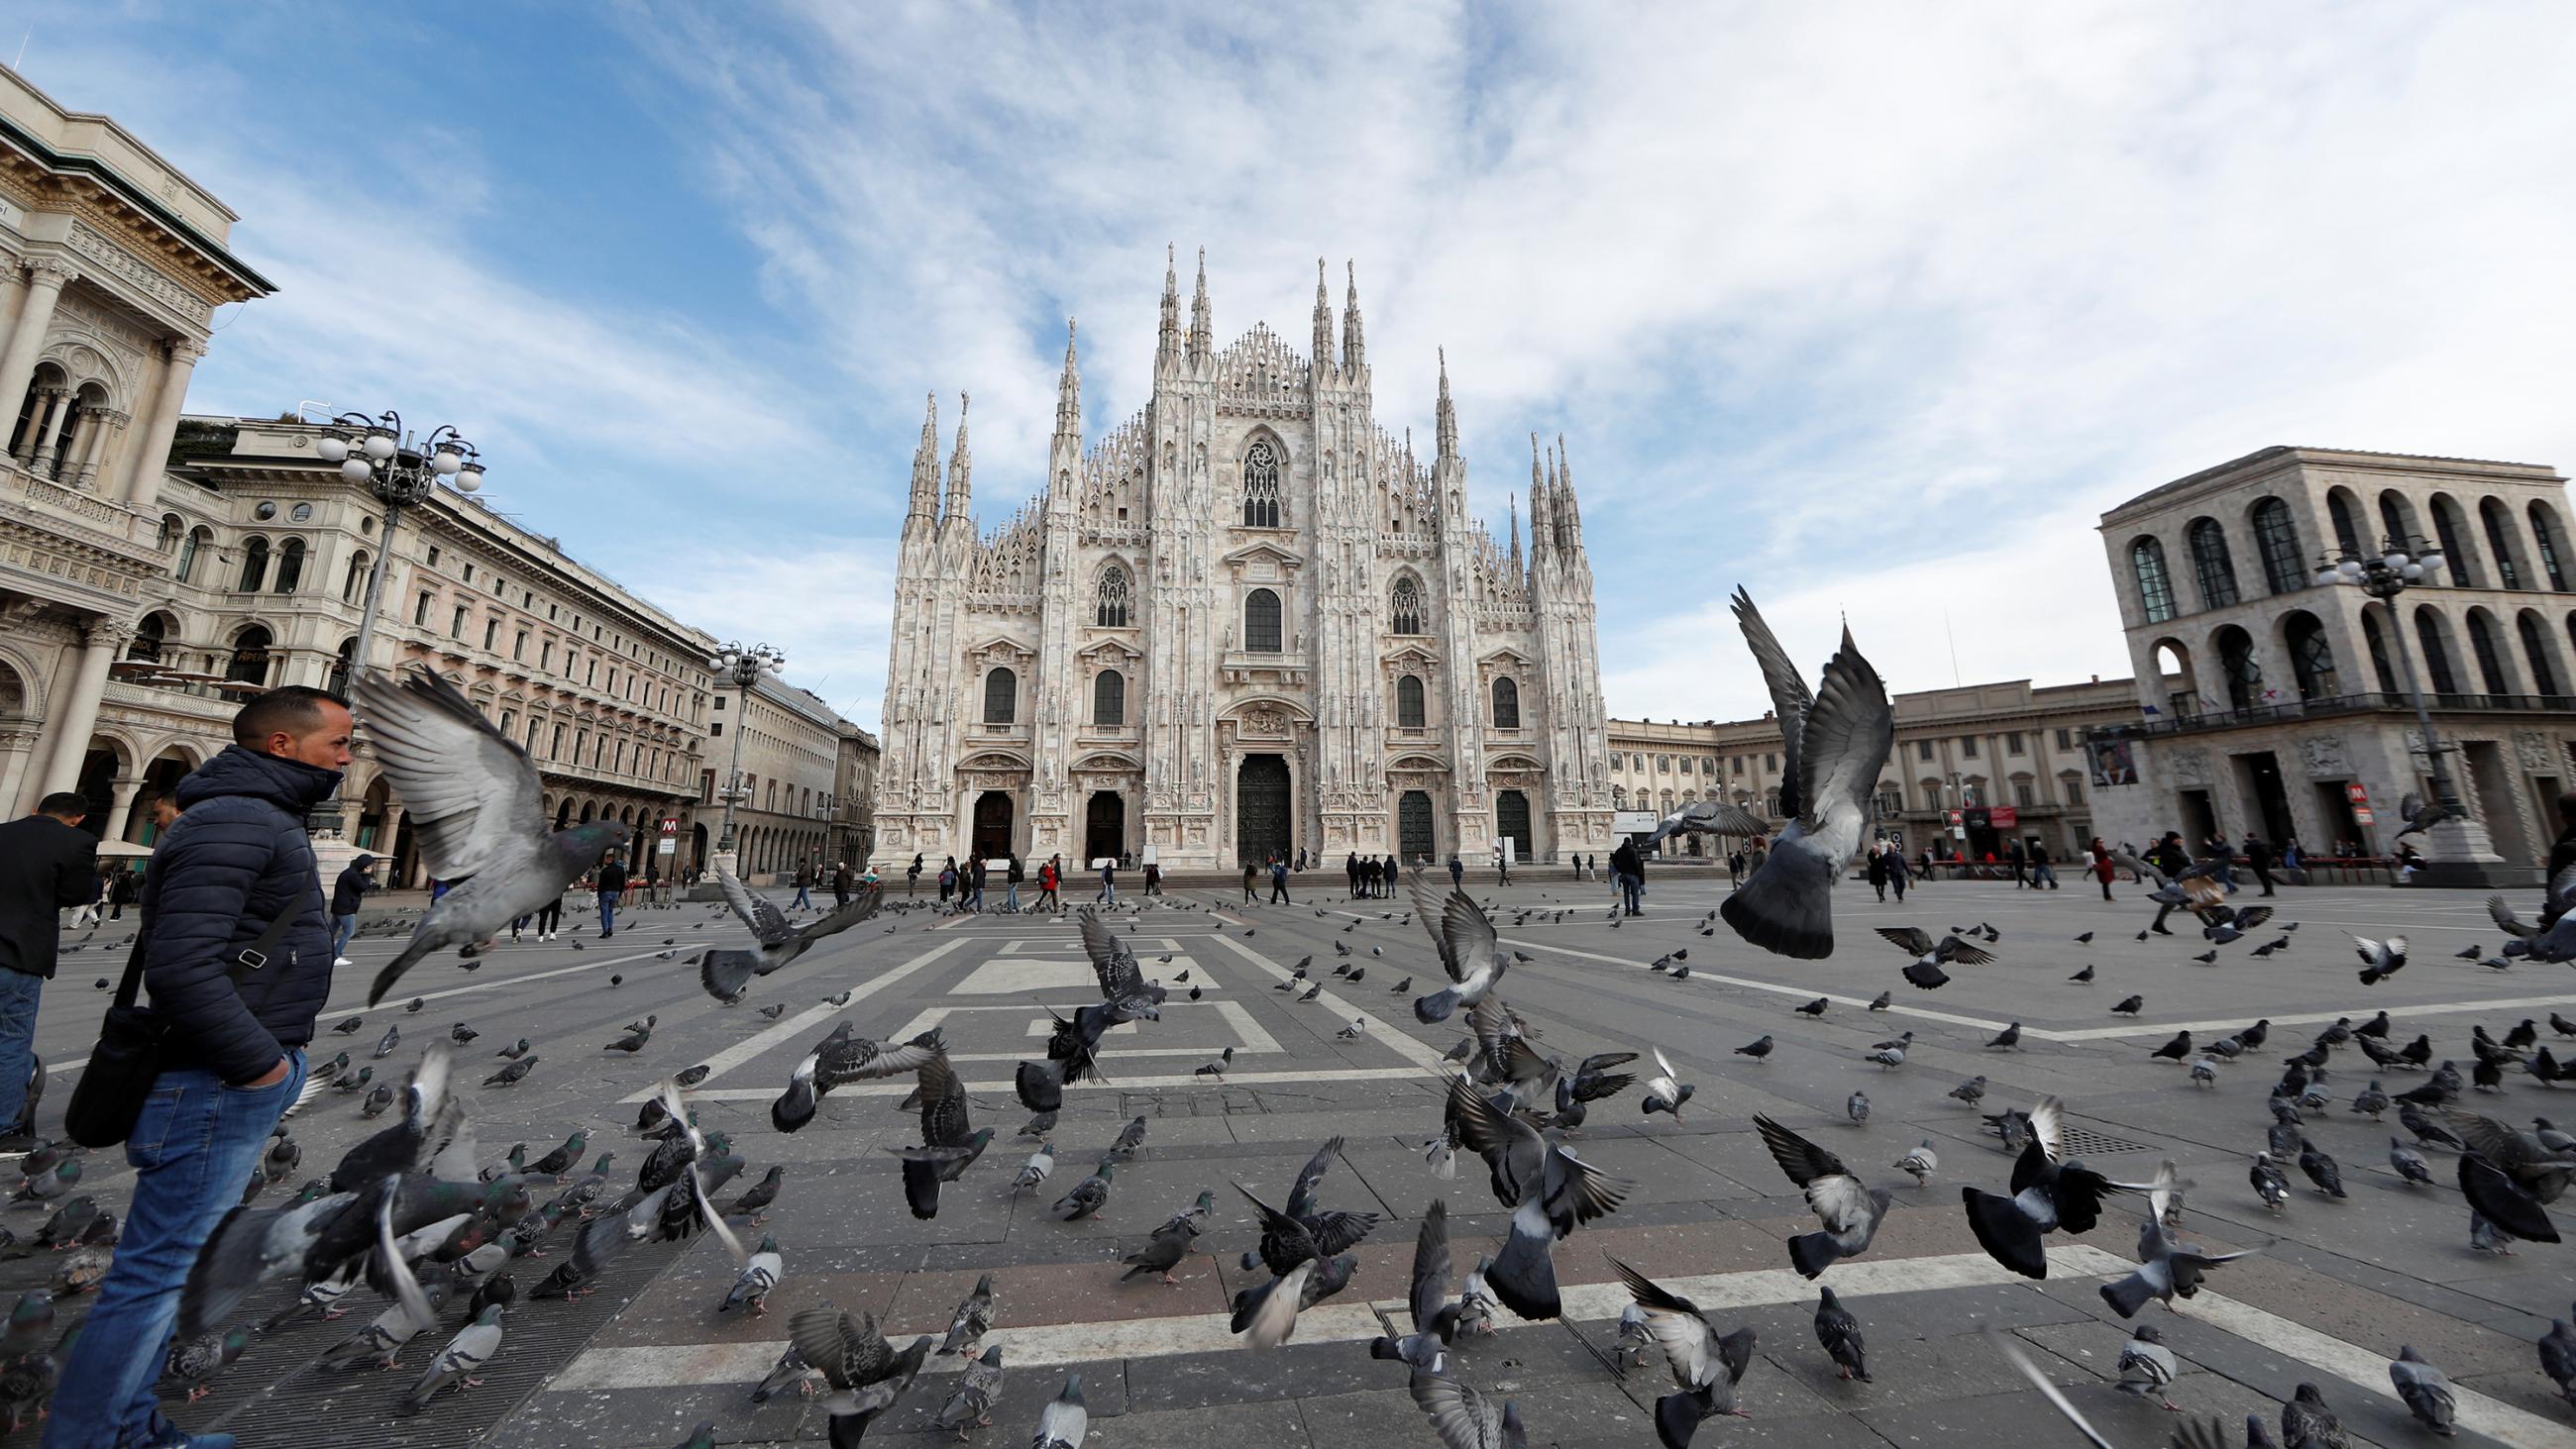 The photo is spectacular showing a full view of the iconic architectural landmark from across an almost empty square. In the foreground is a massive flock of birds captured in full flight. 